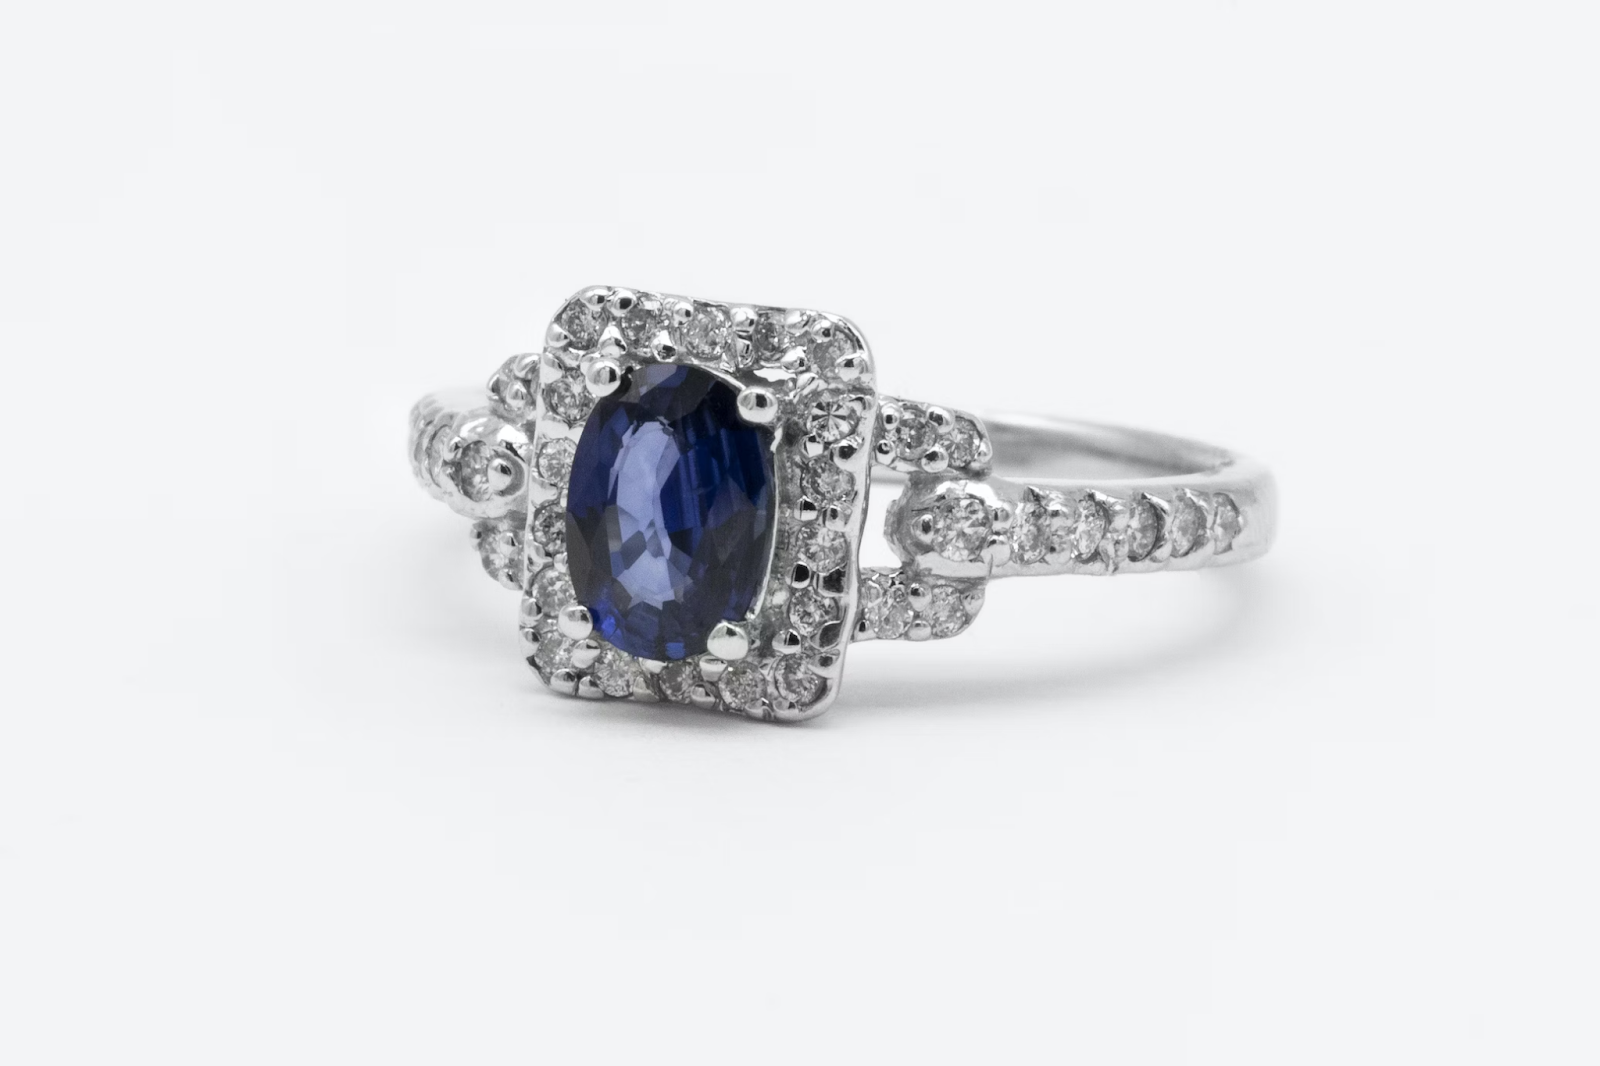 A silver ring with a blue gemstone